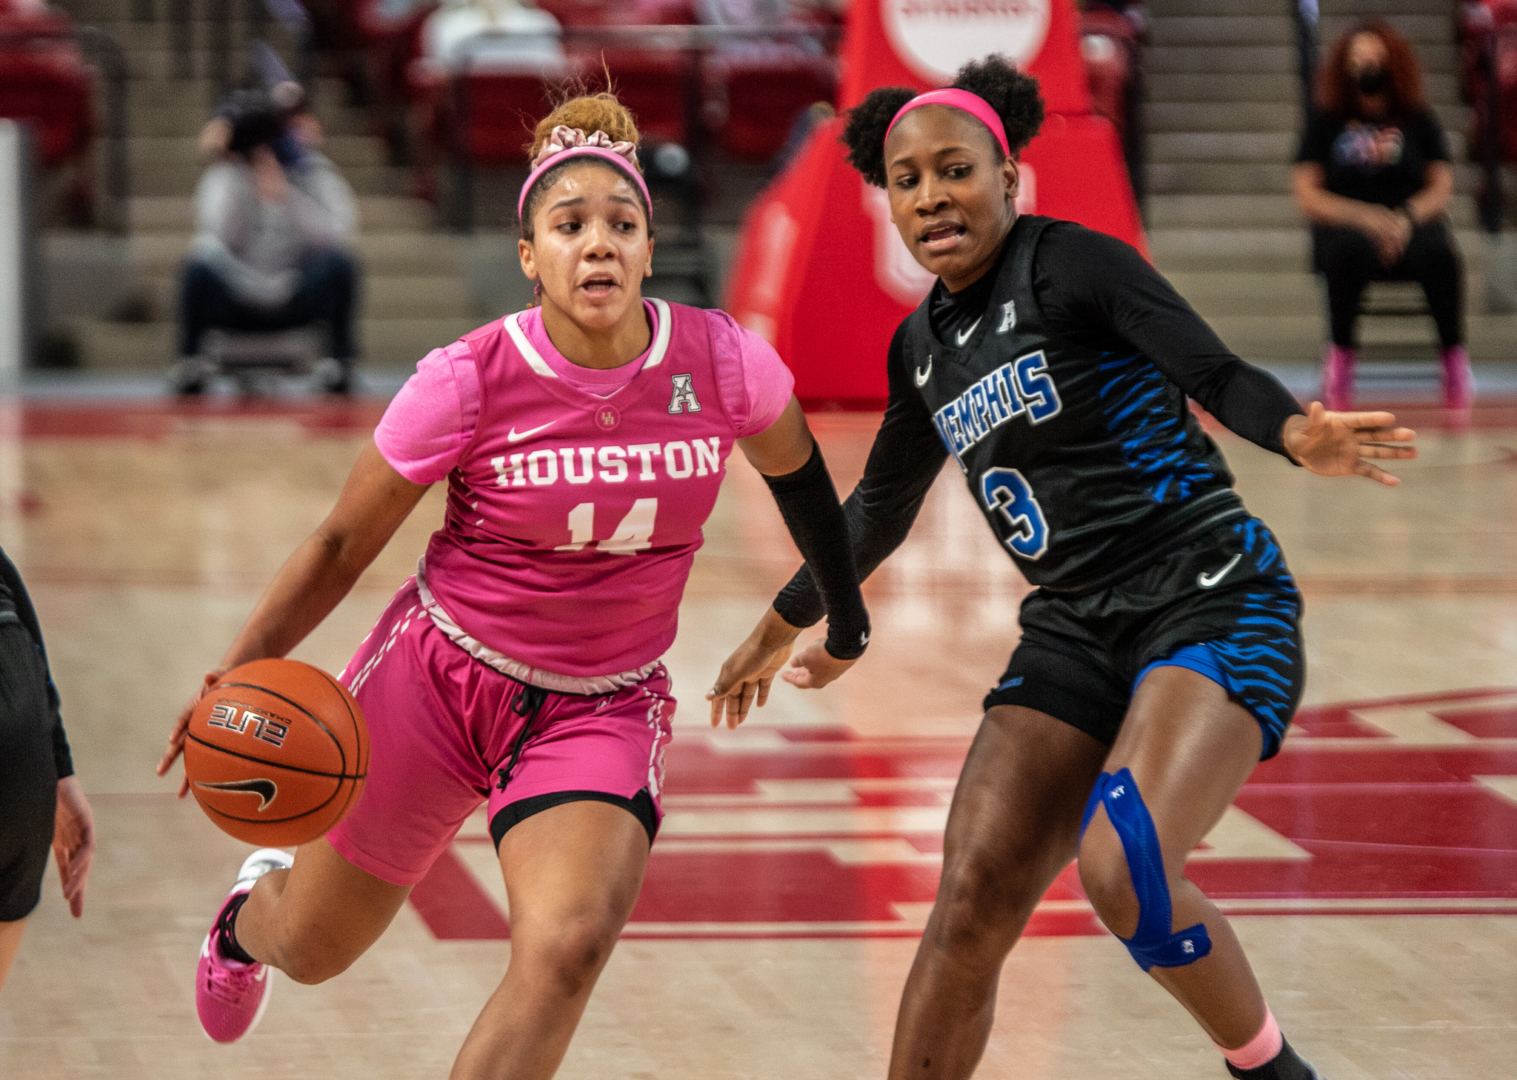 UH women's basketball guard Laila Blair drives into the paint in a game against Memphis during the 2020-21 season at Fertitta Center. | Andy Yanez/The Cougar